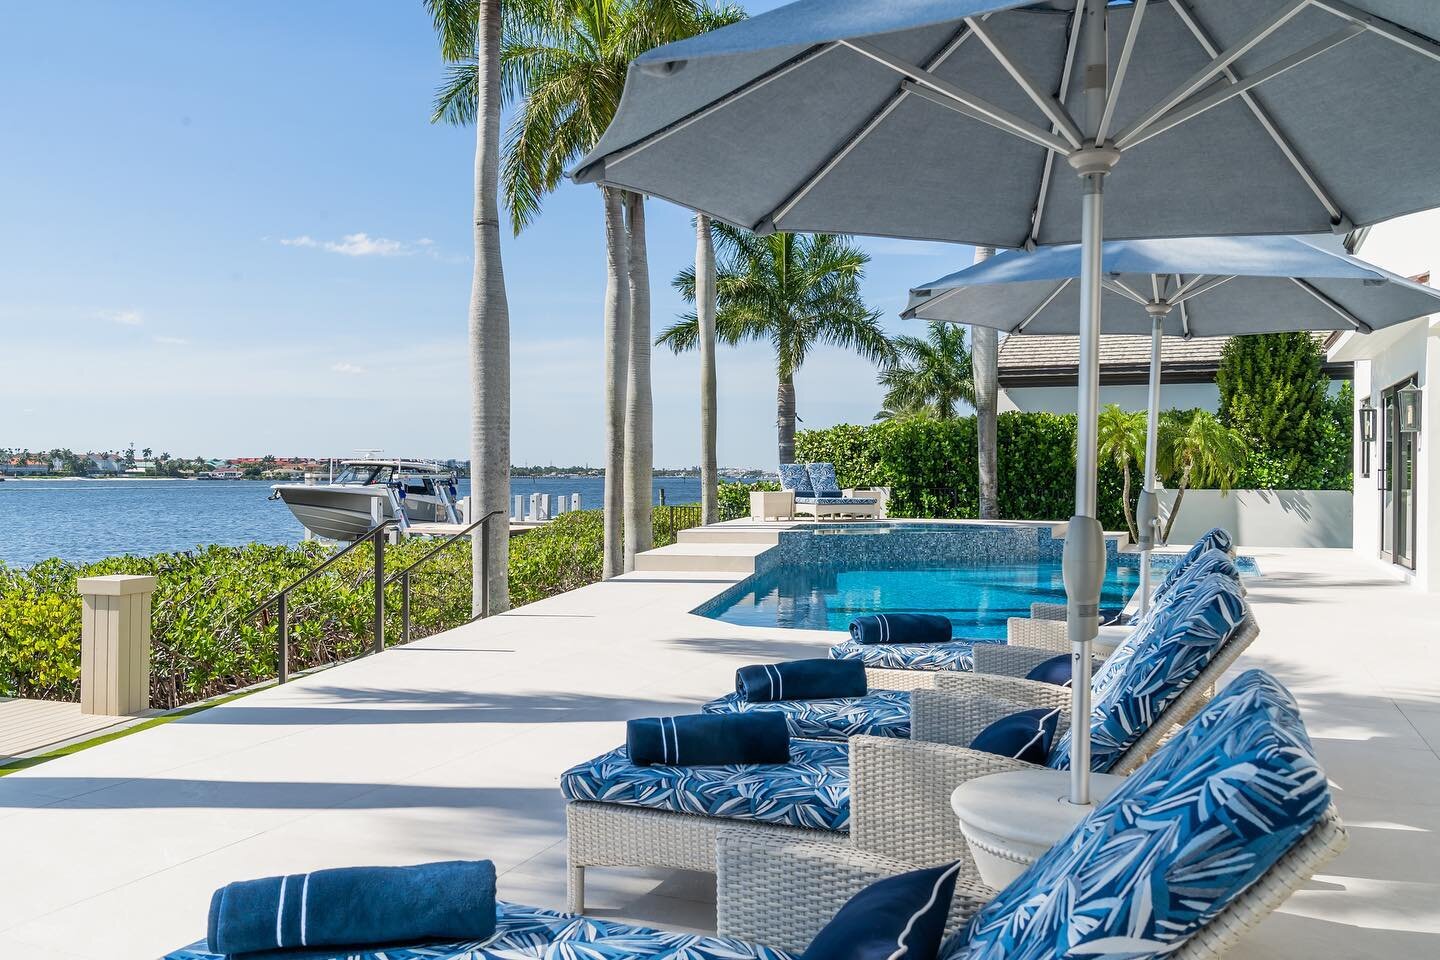 It&rsquo;s the weekend! You can find me in the pool ☀️

#bluelooksgoodonyou intracoastal pool &amp; patio 🛥️ 

Design @erinacantuinteriors 
📸 @venjhaminreyesphotography 
Builder: Wadsworth Developers

#outdoorliving #waterfront #waterfronthomes #bo